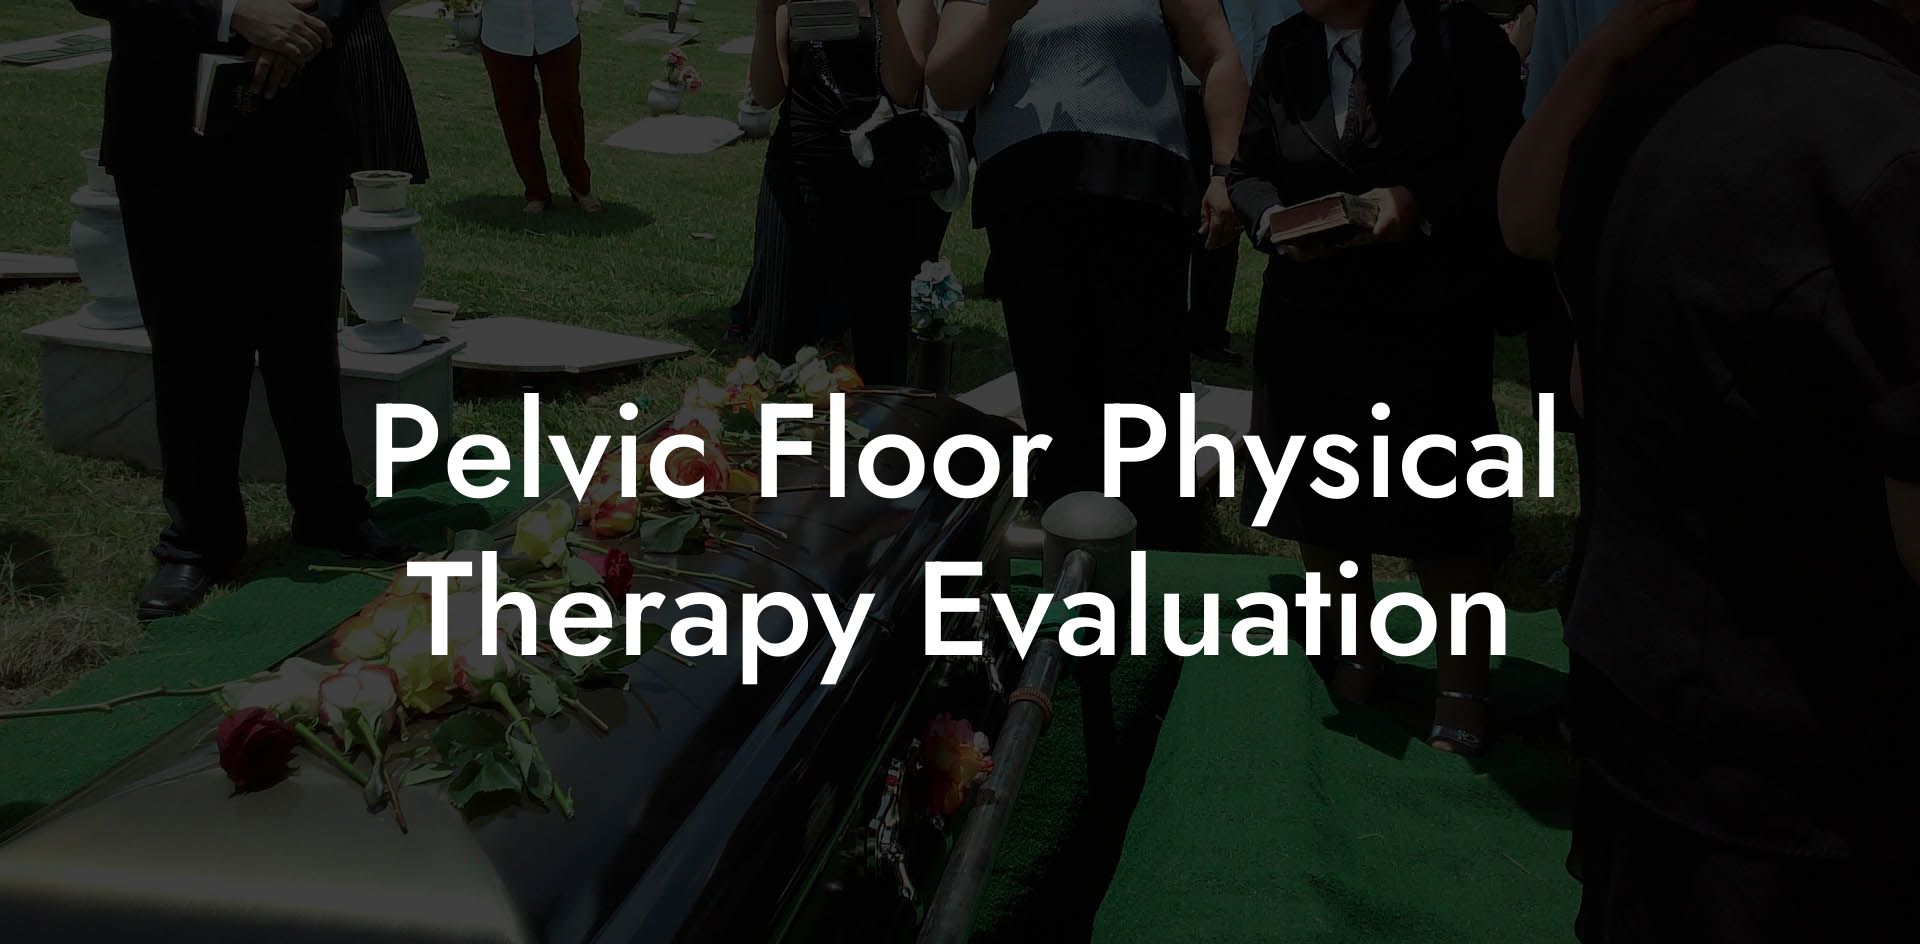 Pelvic Floor Physical Therapy Evaluation